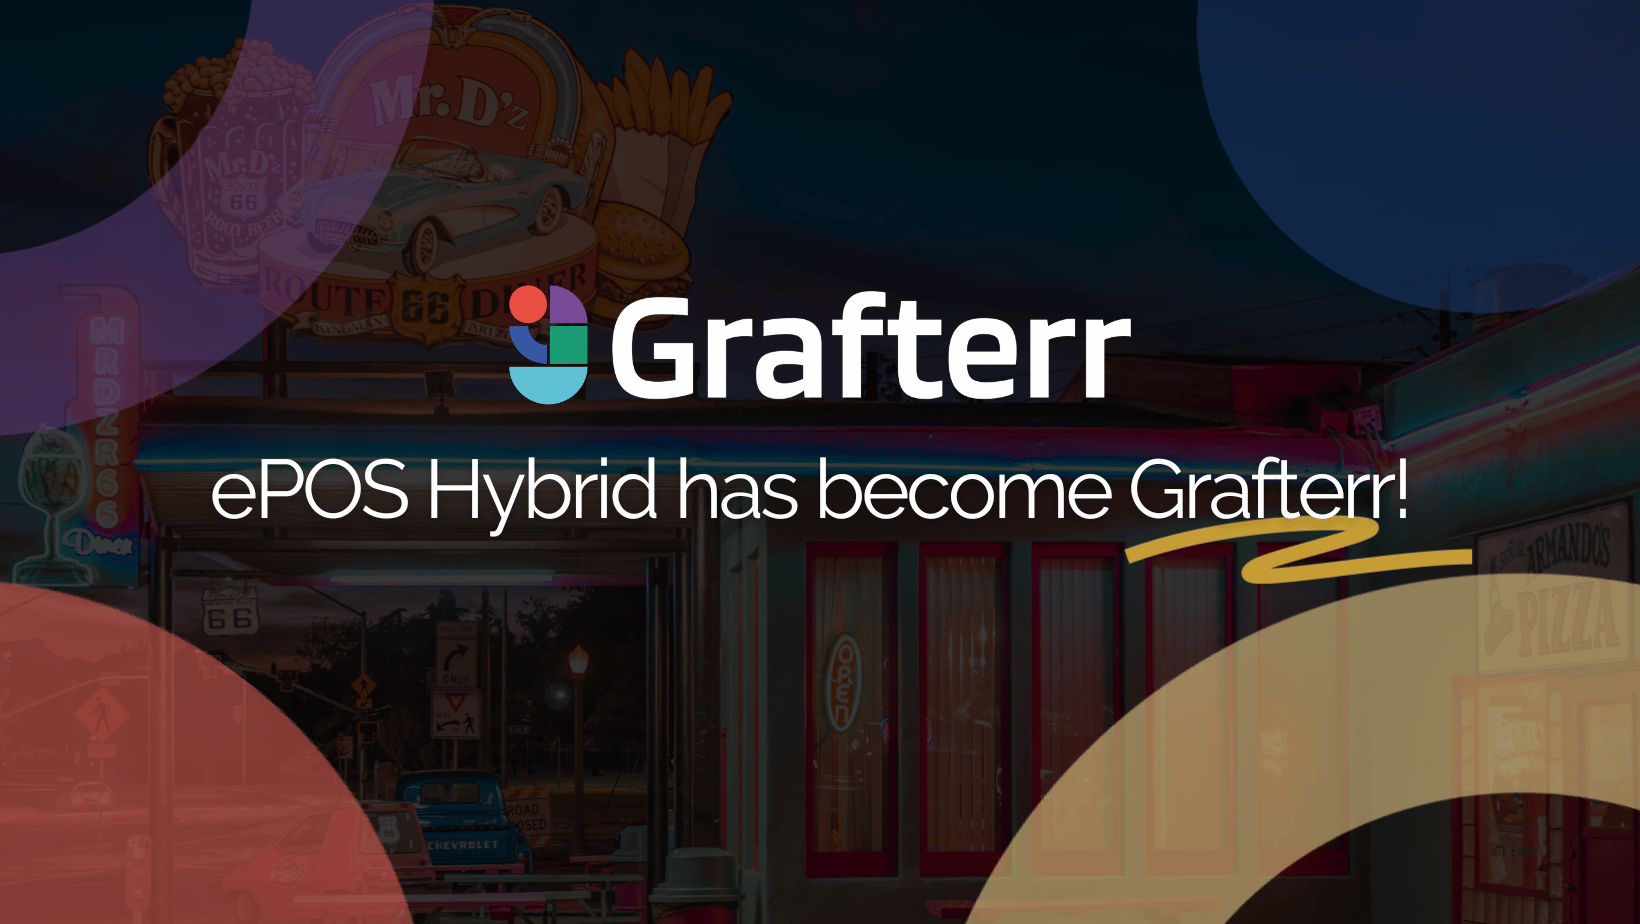 ePOS Hybrid has become Grafterr! 